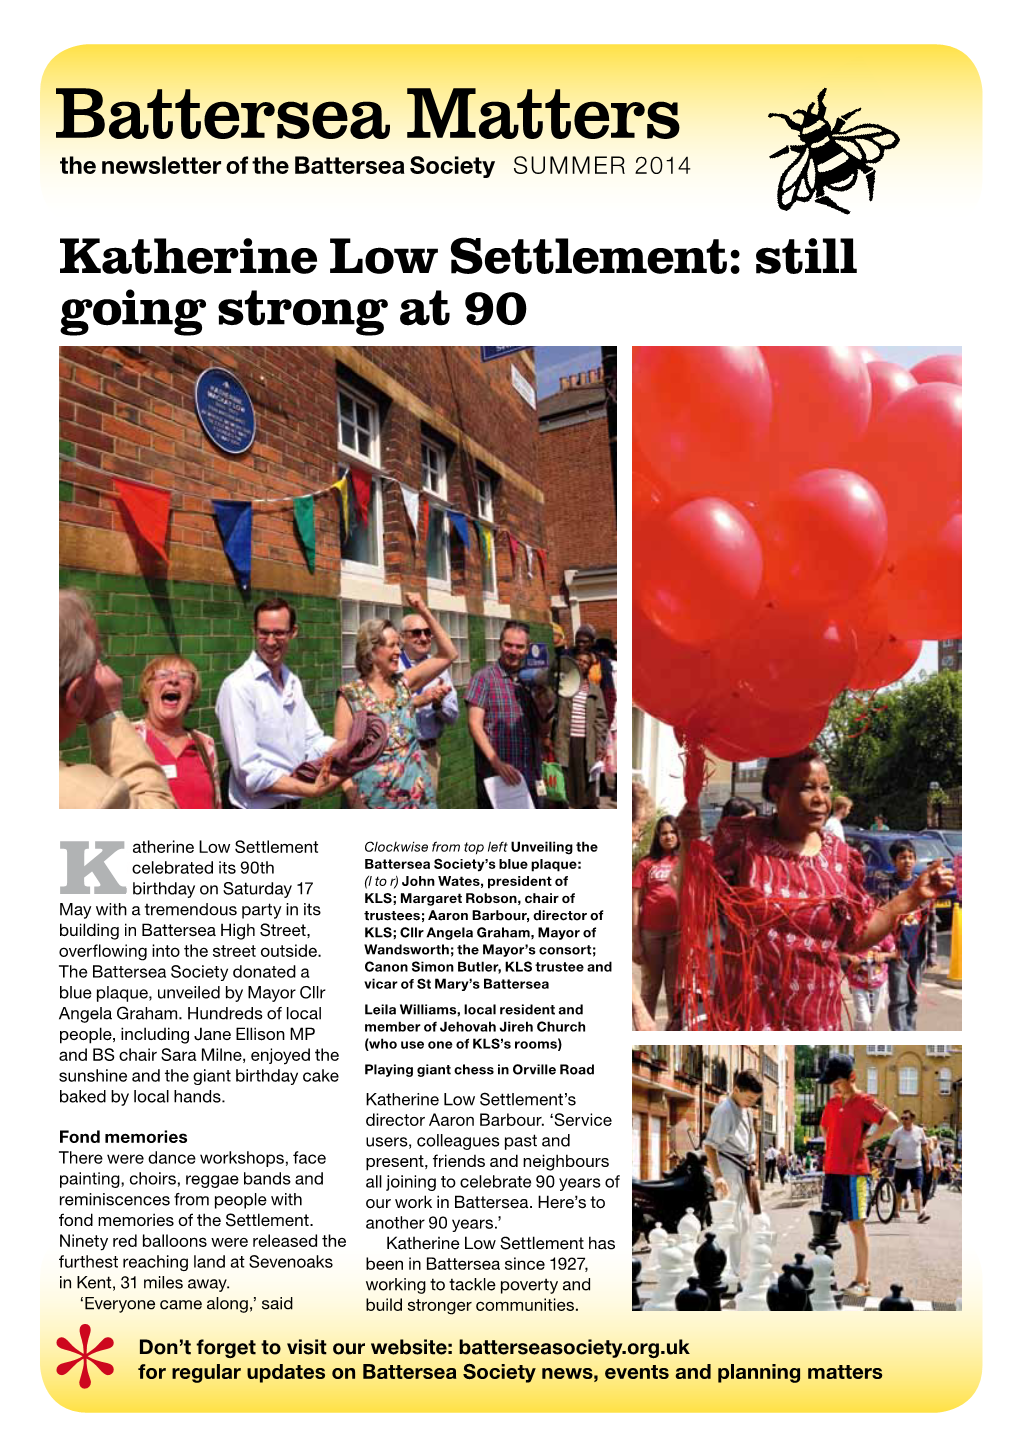 Katherine Low Settlement: Still Going Strong at 90